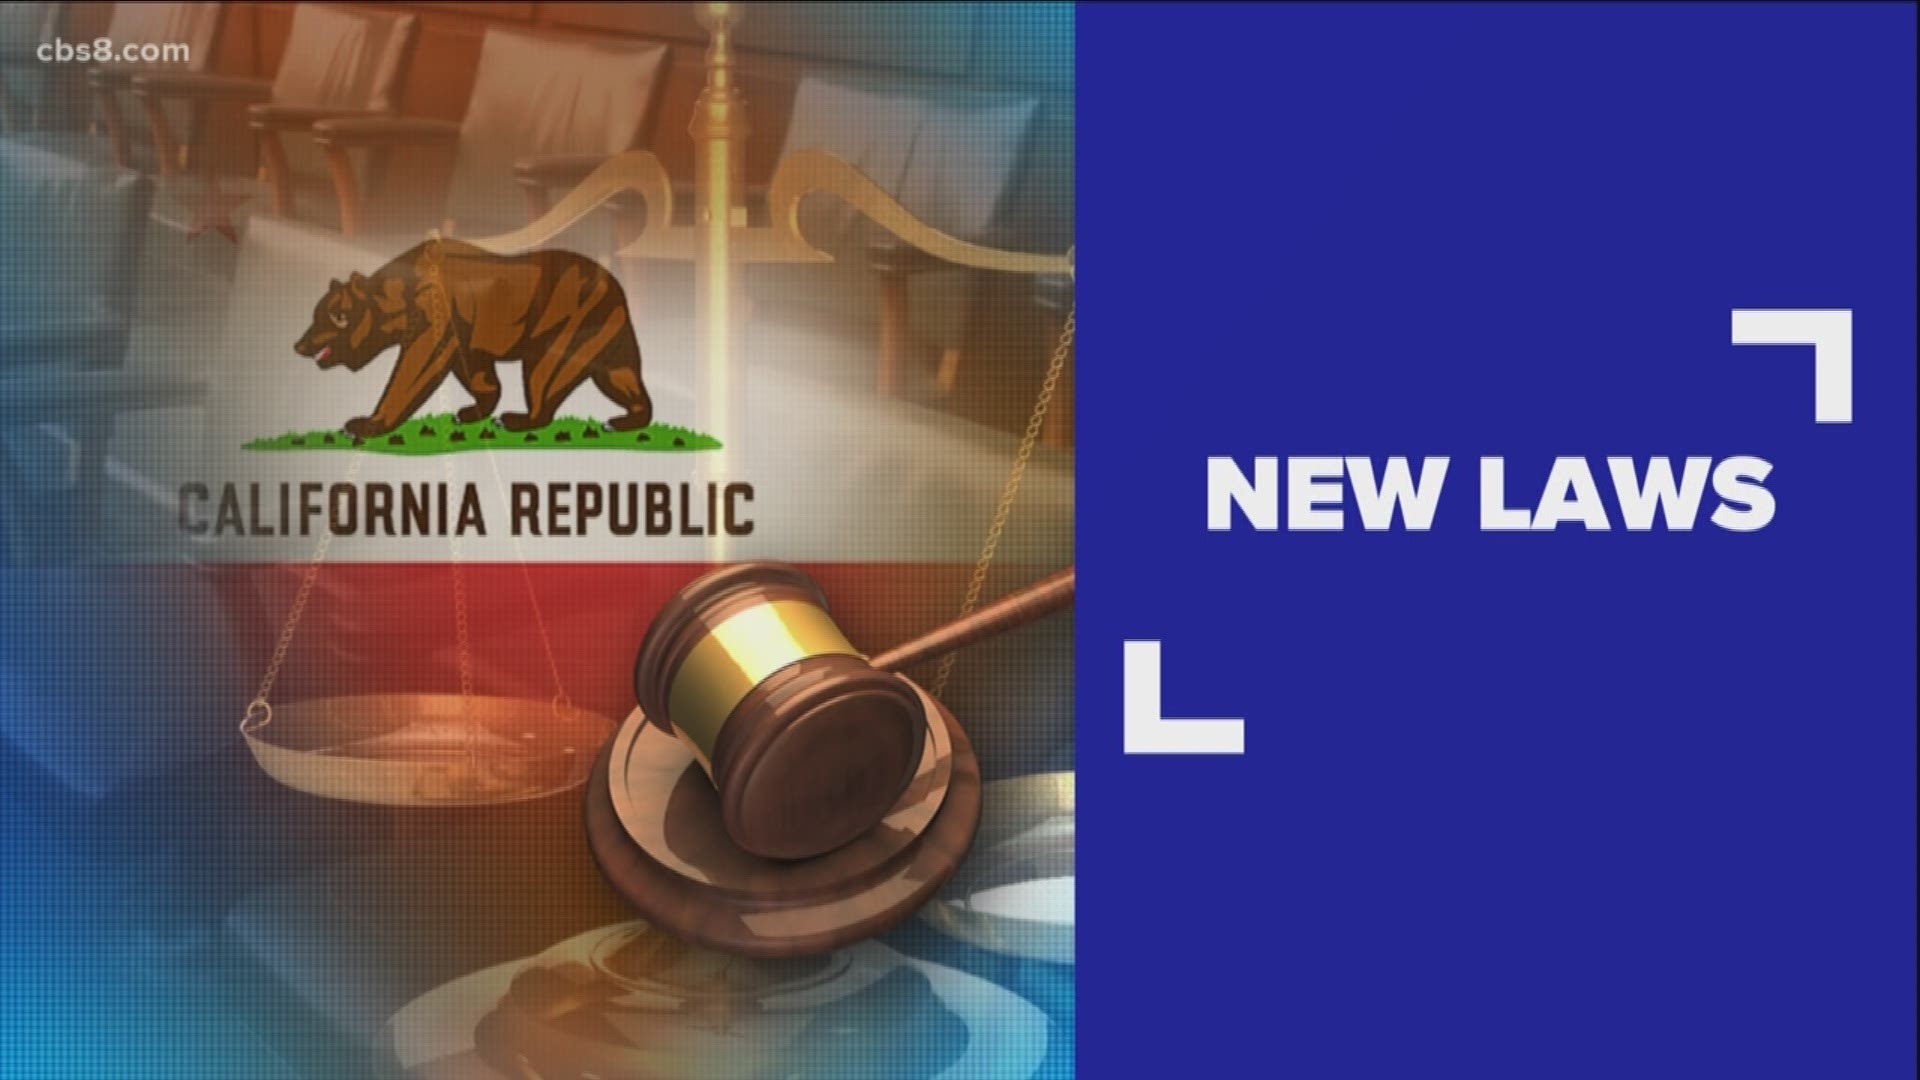 Here are the new California laws that kick in on Jan. 1